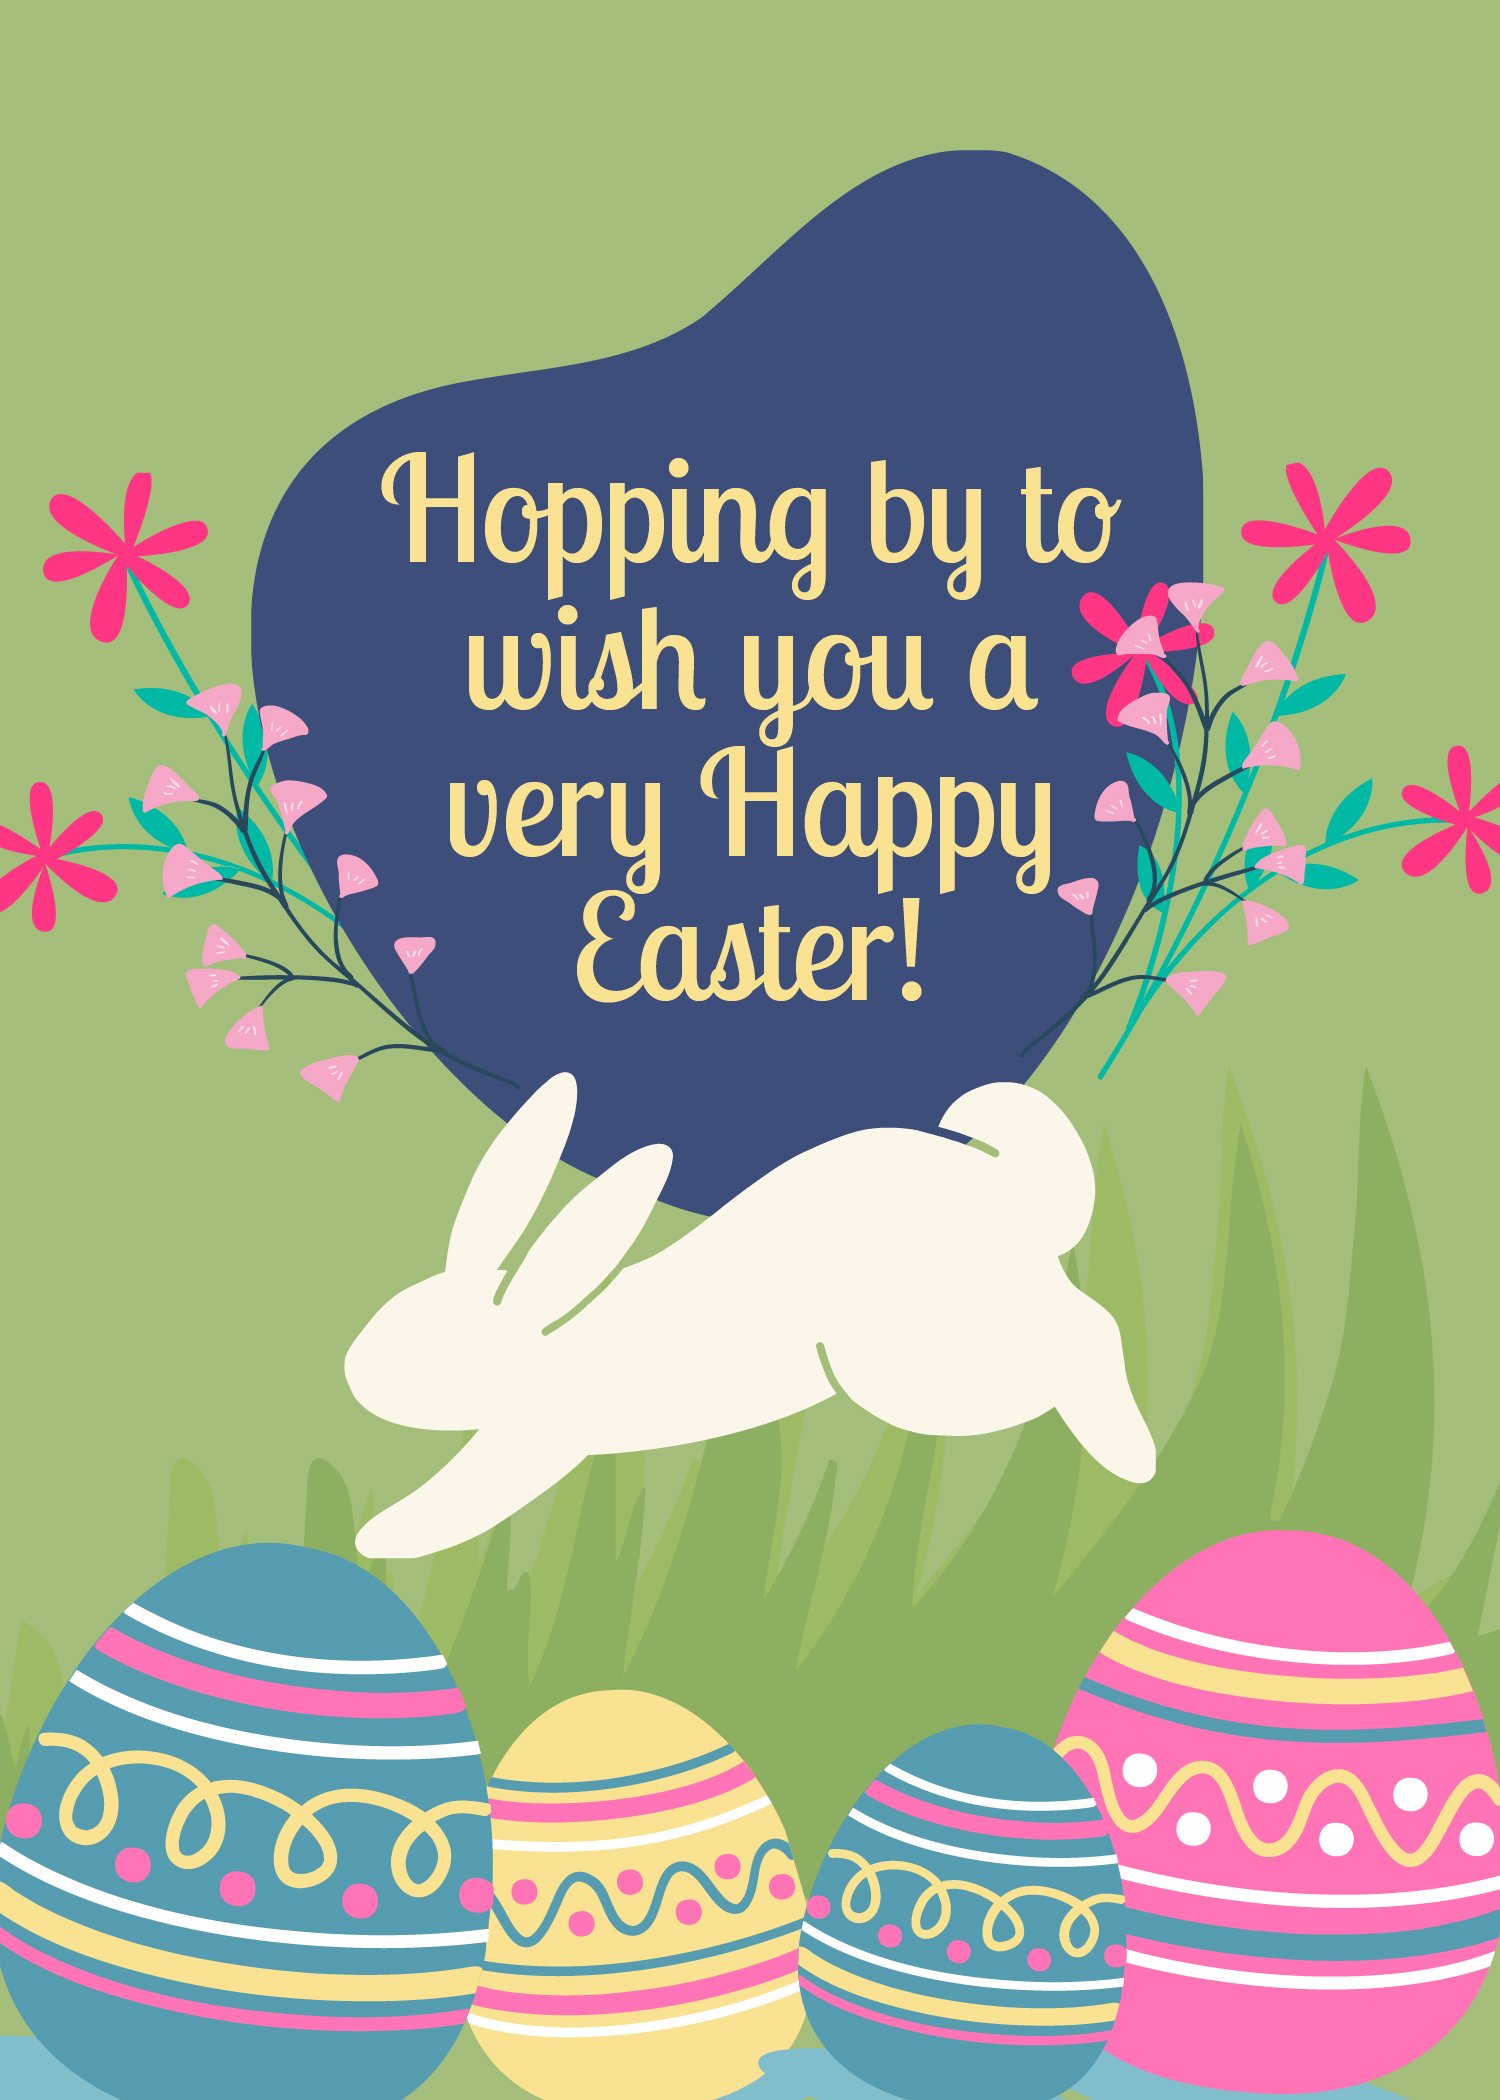 Free Easter Day Wishes in Word, Google Docs, Illustrator, PSD, Apple Pages, EPS, SVG, JPG, PNG